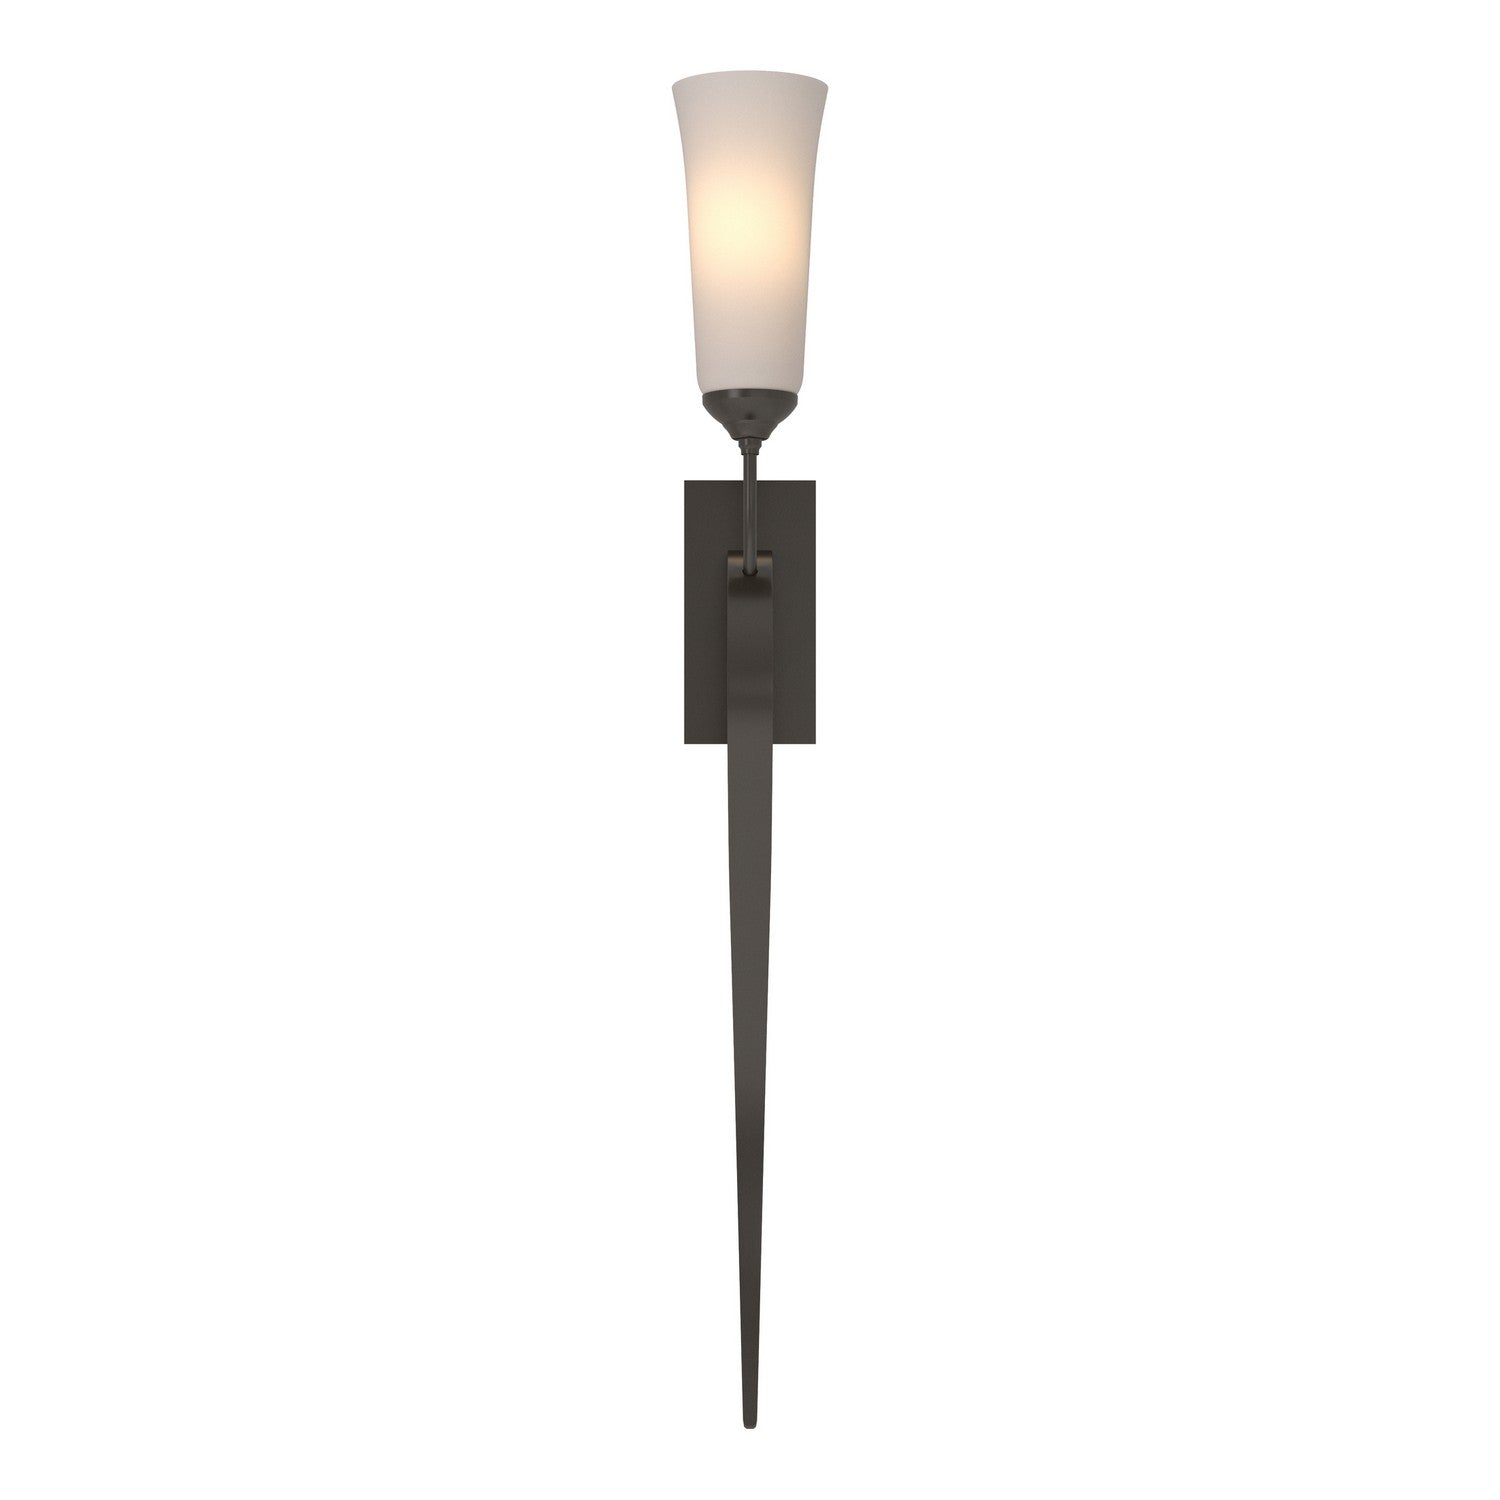 Hubbardton Forge - One Light Wall Sconce - Sweeping Taper - Oil Rubbed Bronze- Union Lighting Luminaires Decor